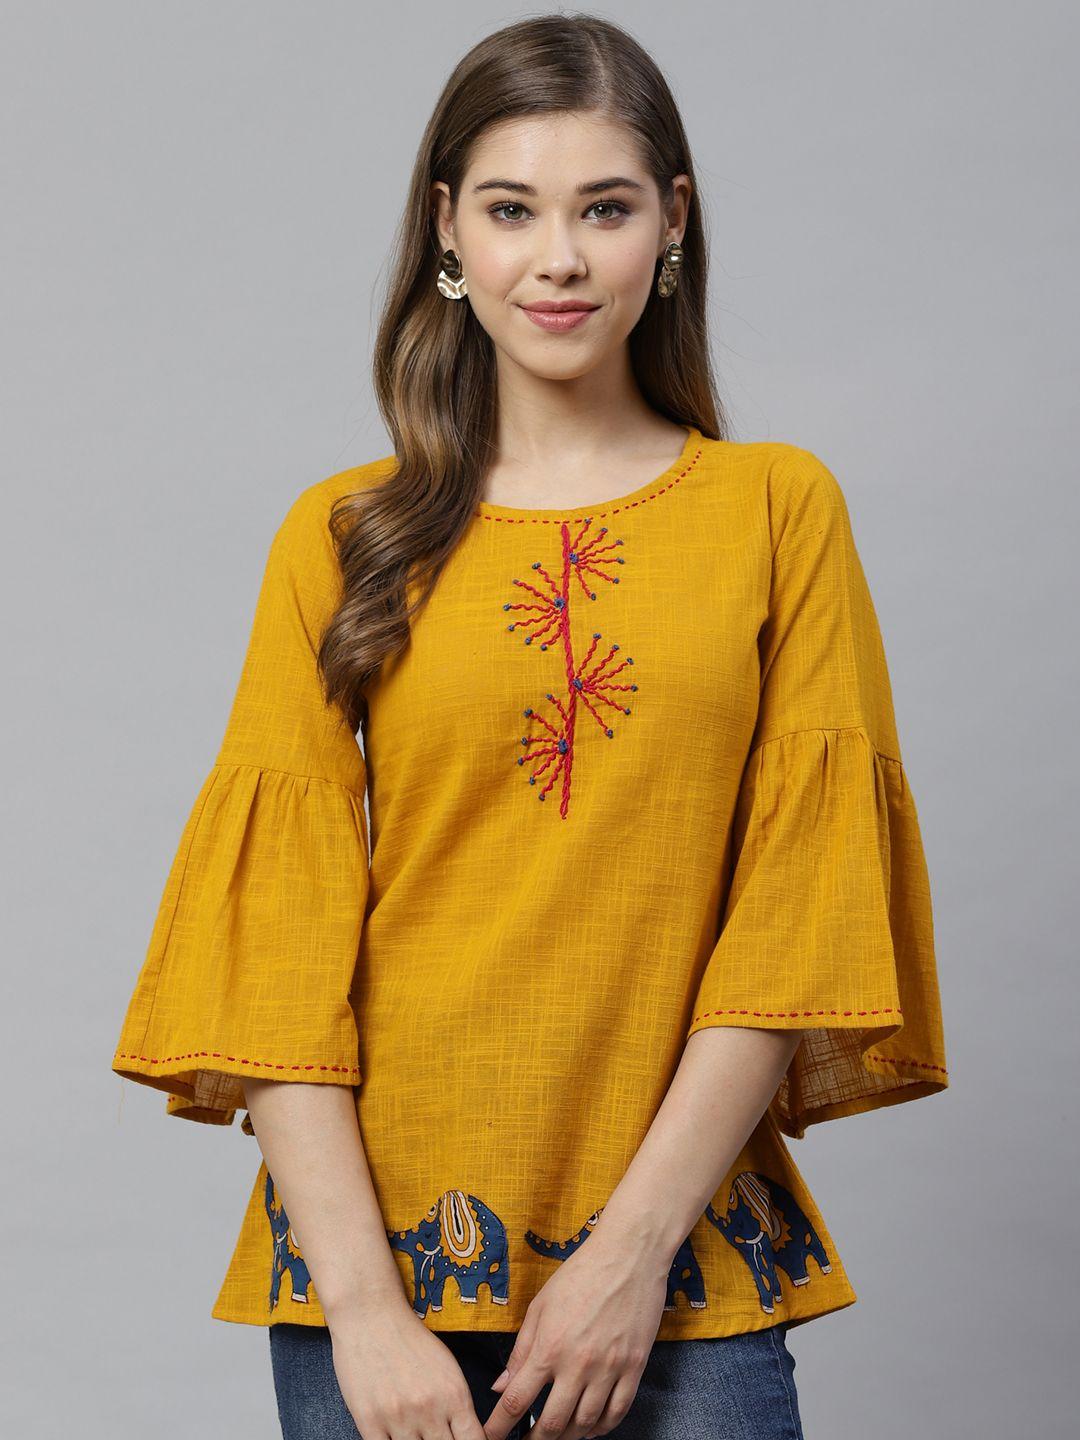 yash gallery women mustard yellow applique detail a-line top